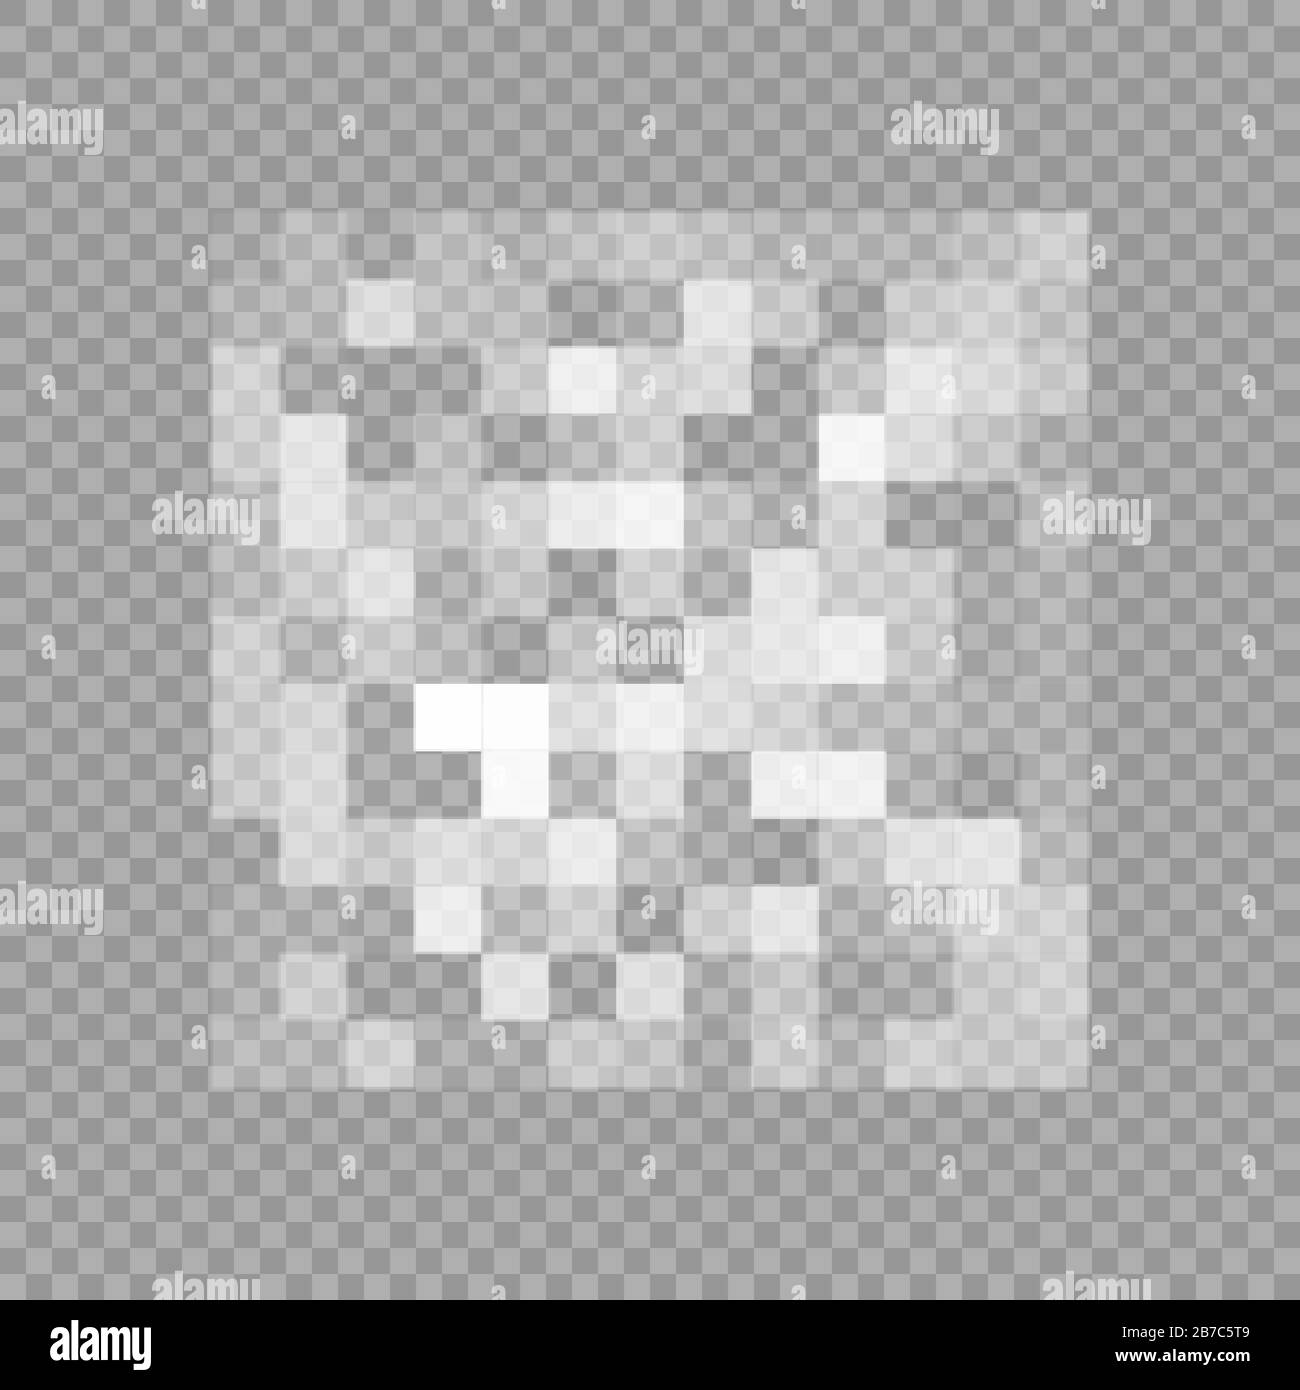 Censorship Gray Mosaic Censored Data Pixels Blur Area Private Content Vector Illustration Isolated On Transparent Background Stock Vector Image Art Alamy